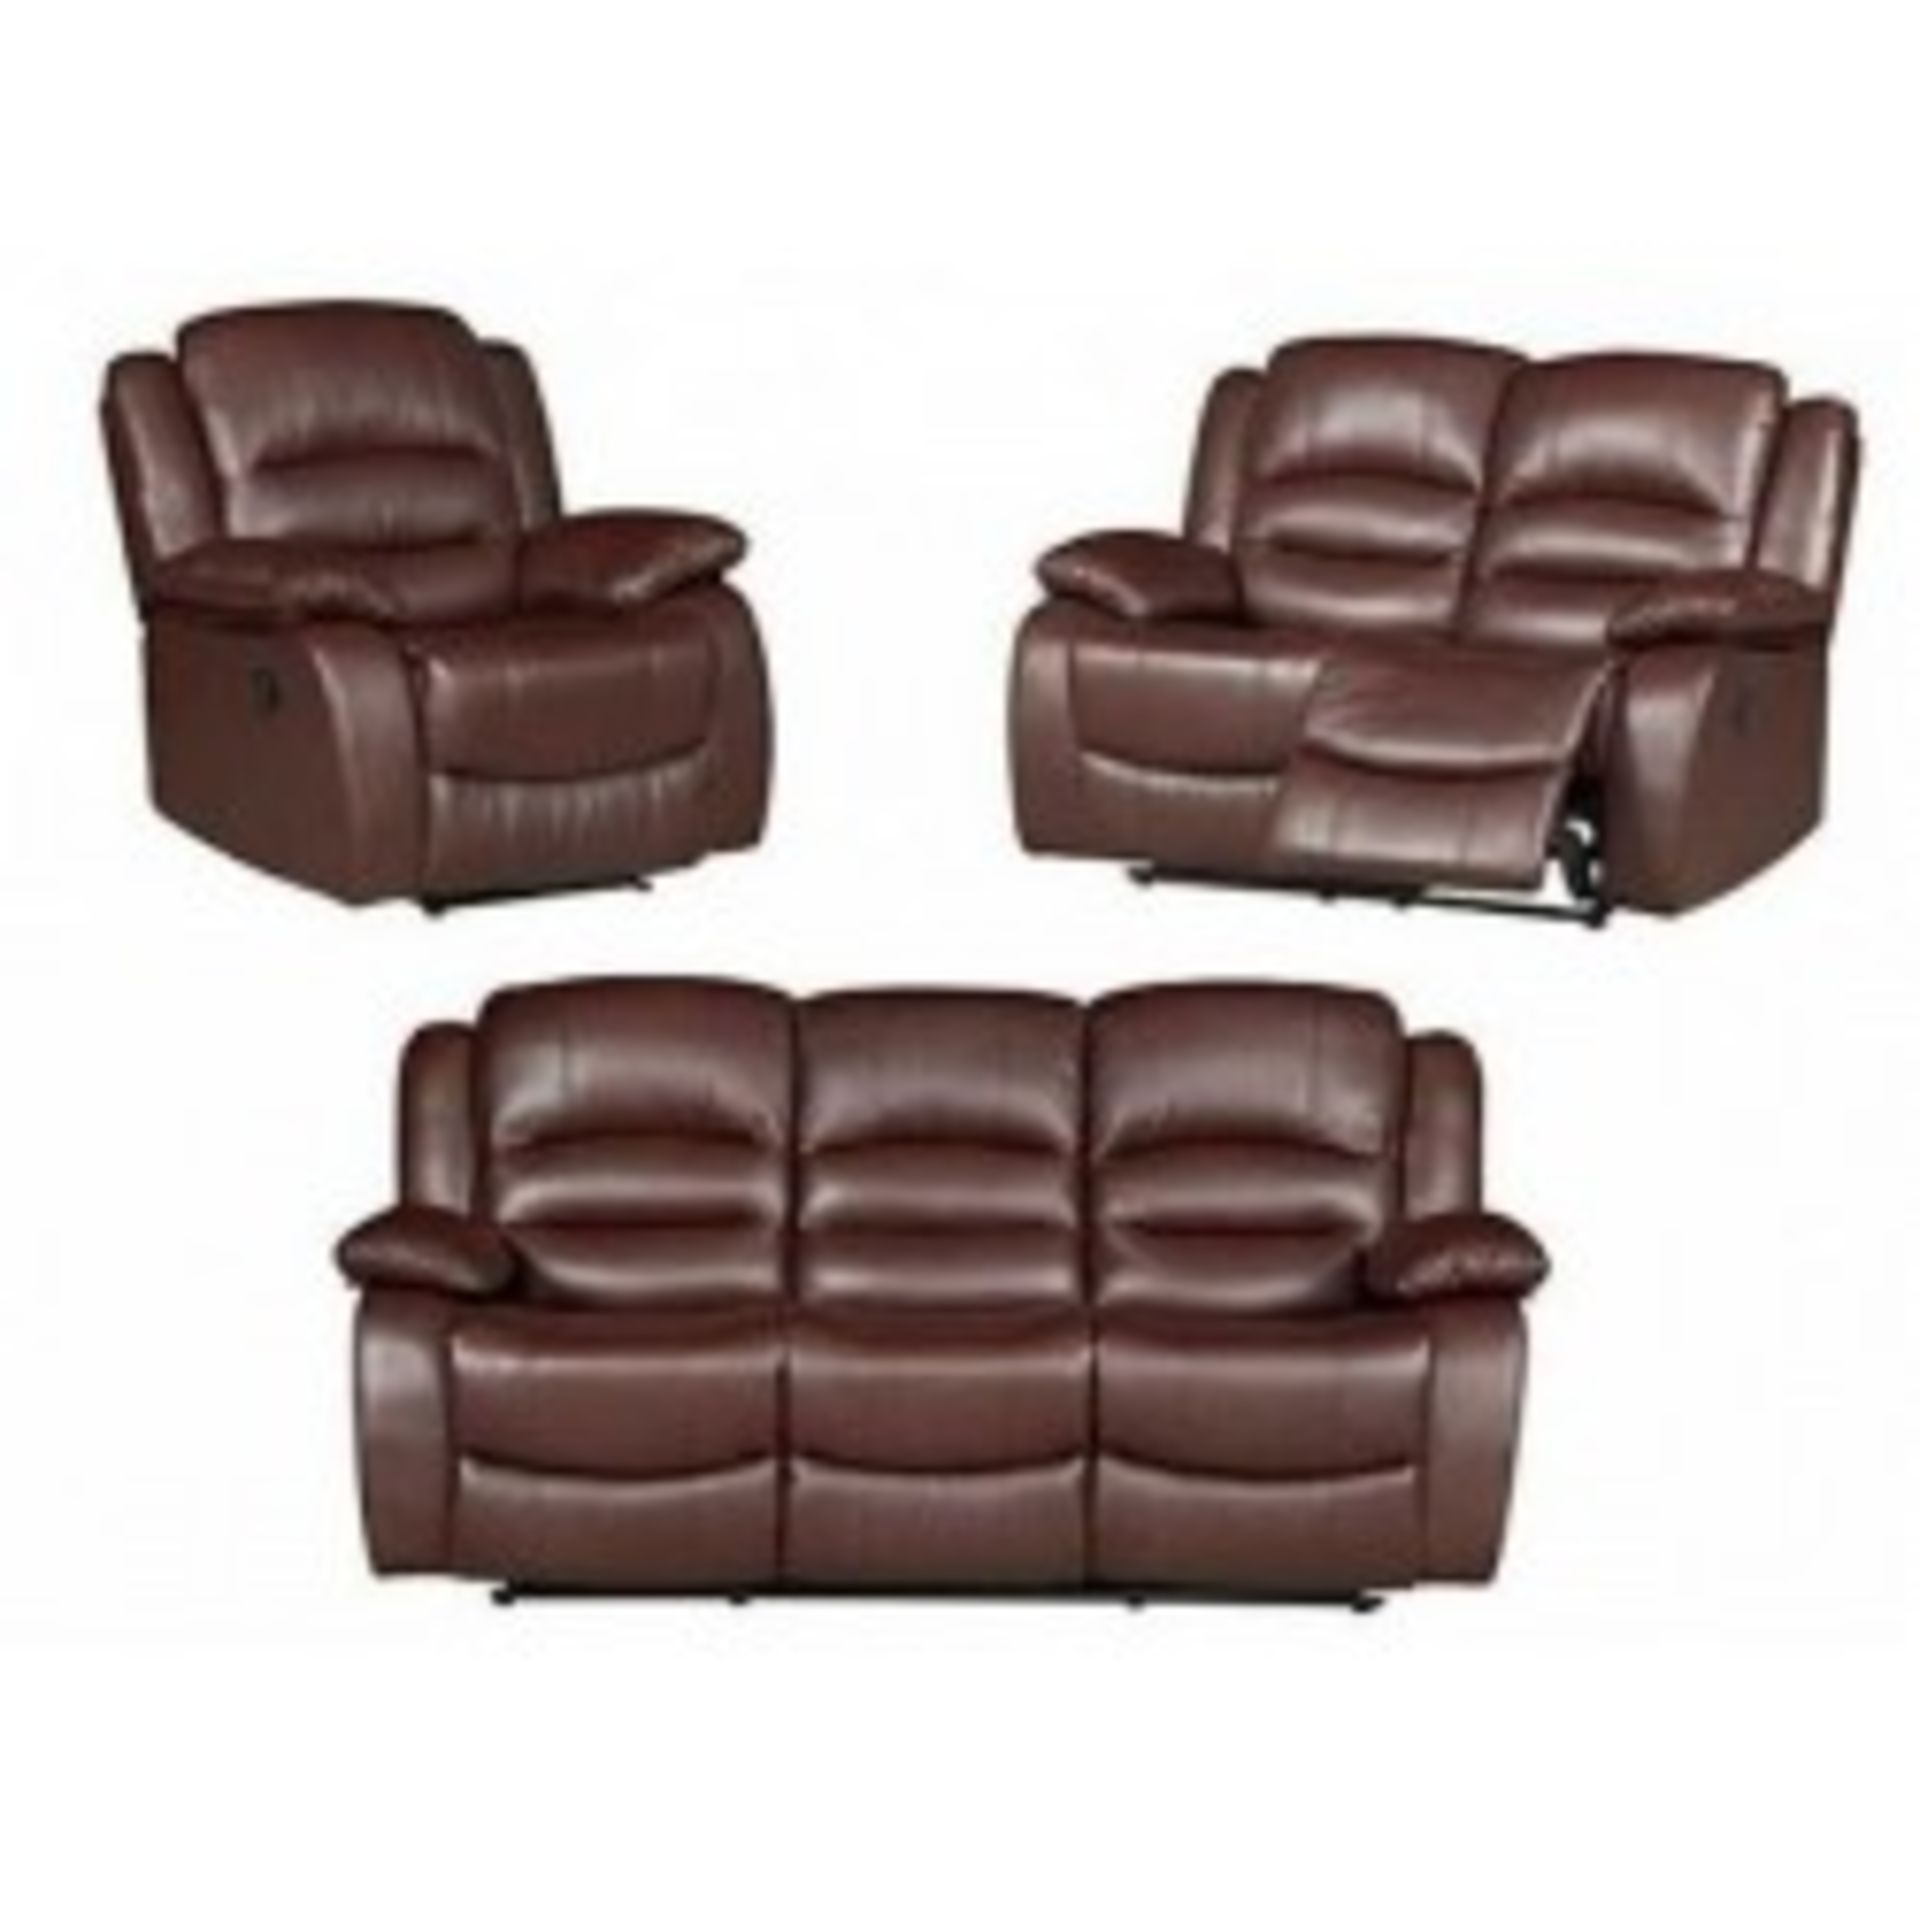 Nice deluxe 3 seater plus 3 seater leather reclining sofas in nut brown - Image 2 of 2